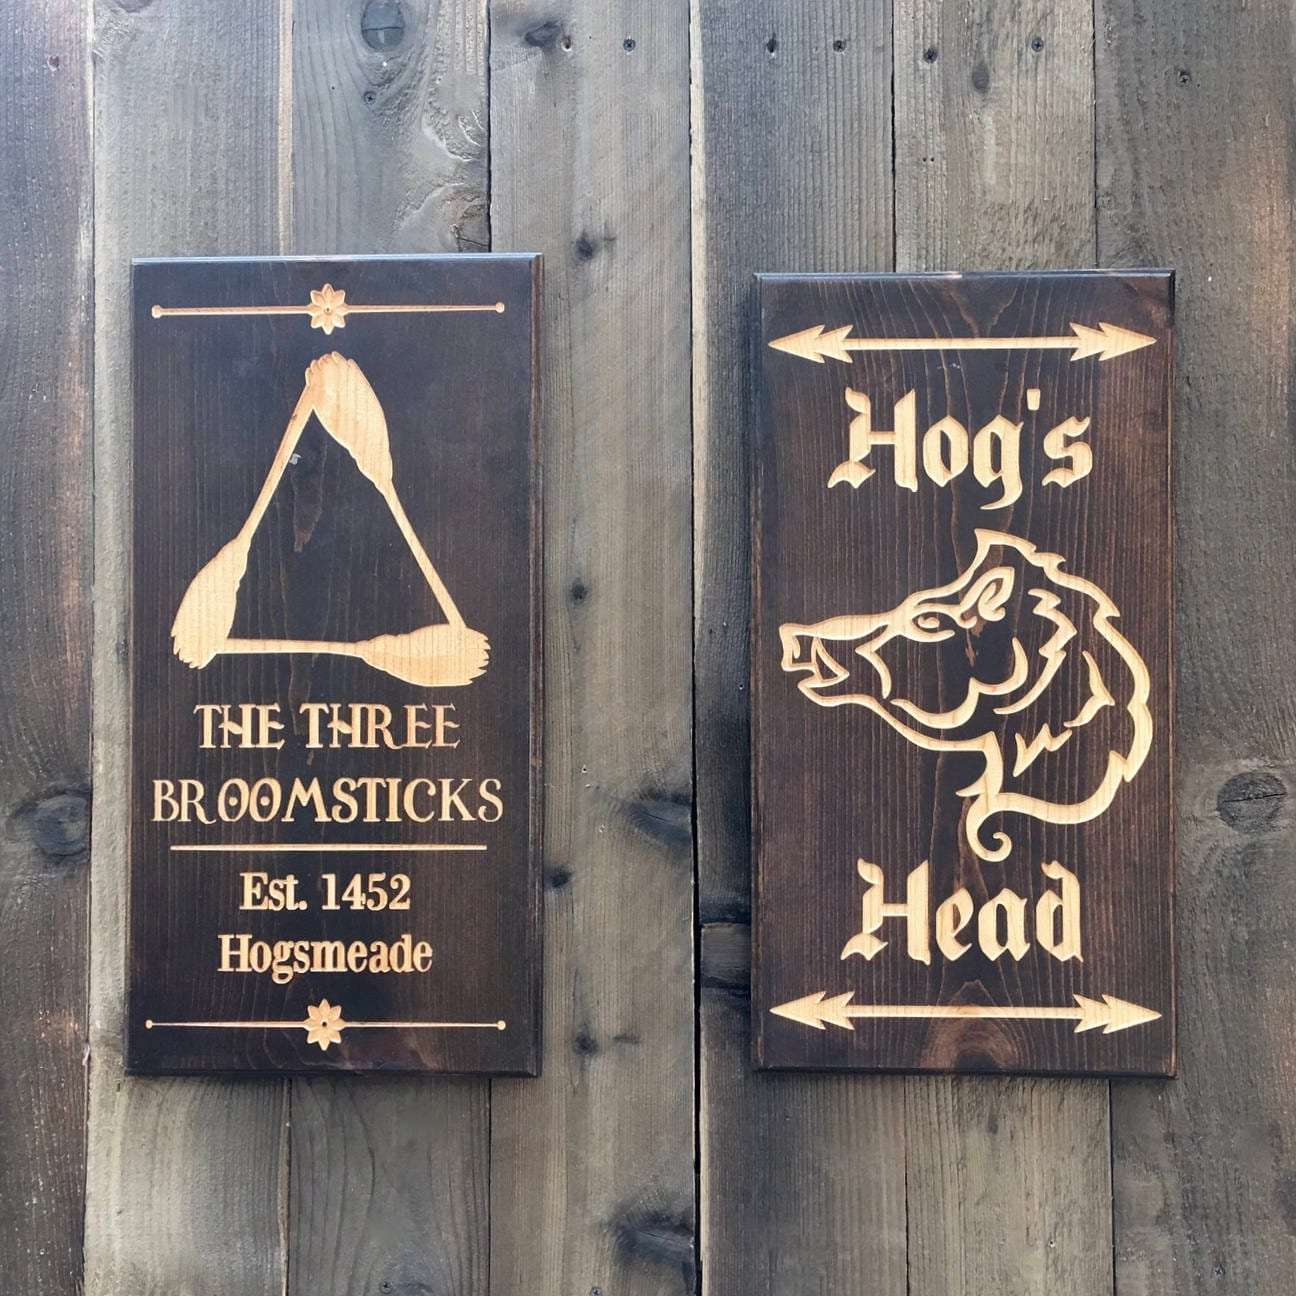 Wizarding World Pub Bar Signs Harry Potter Inspired Leaky